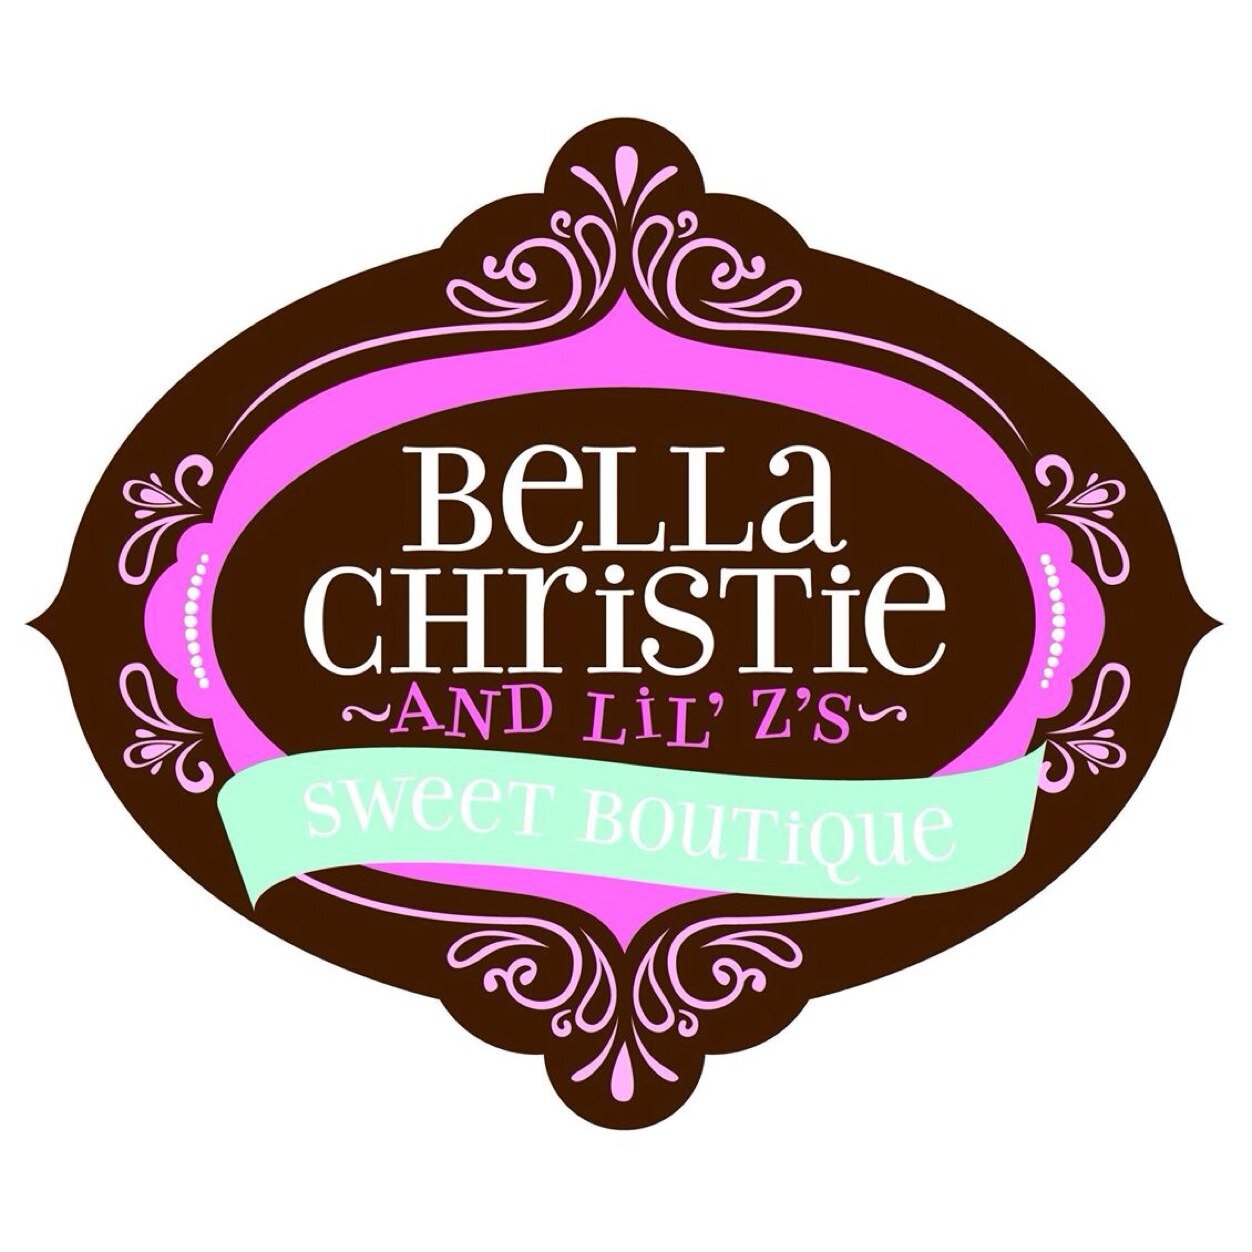 Bella Christie and Lil' Z's Sweet Boutique specializes in custom cakes and mini desserts. We've got cupcakes, cake pops, chocolate covered confections and more!